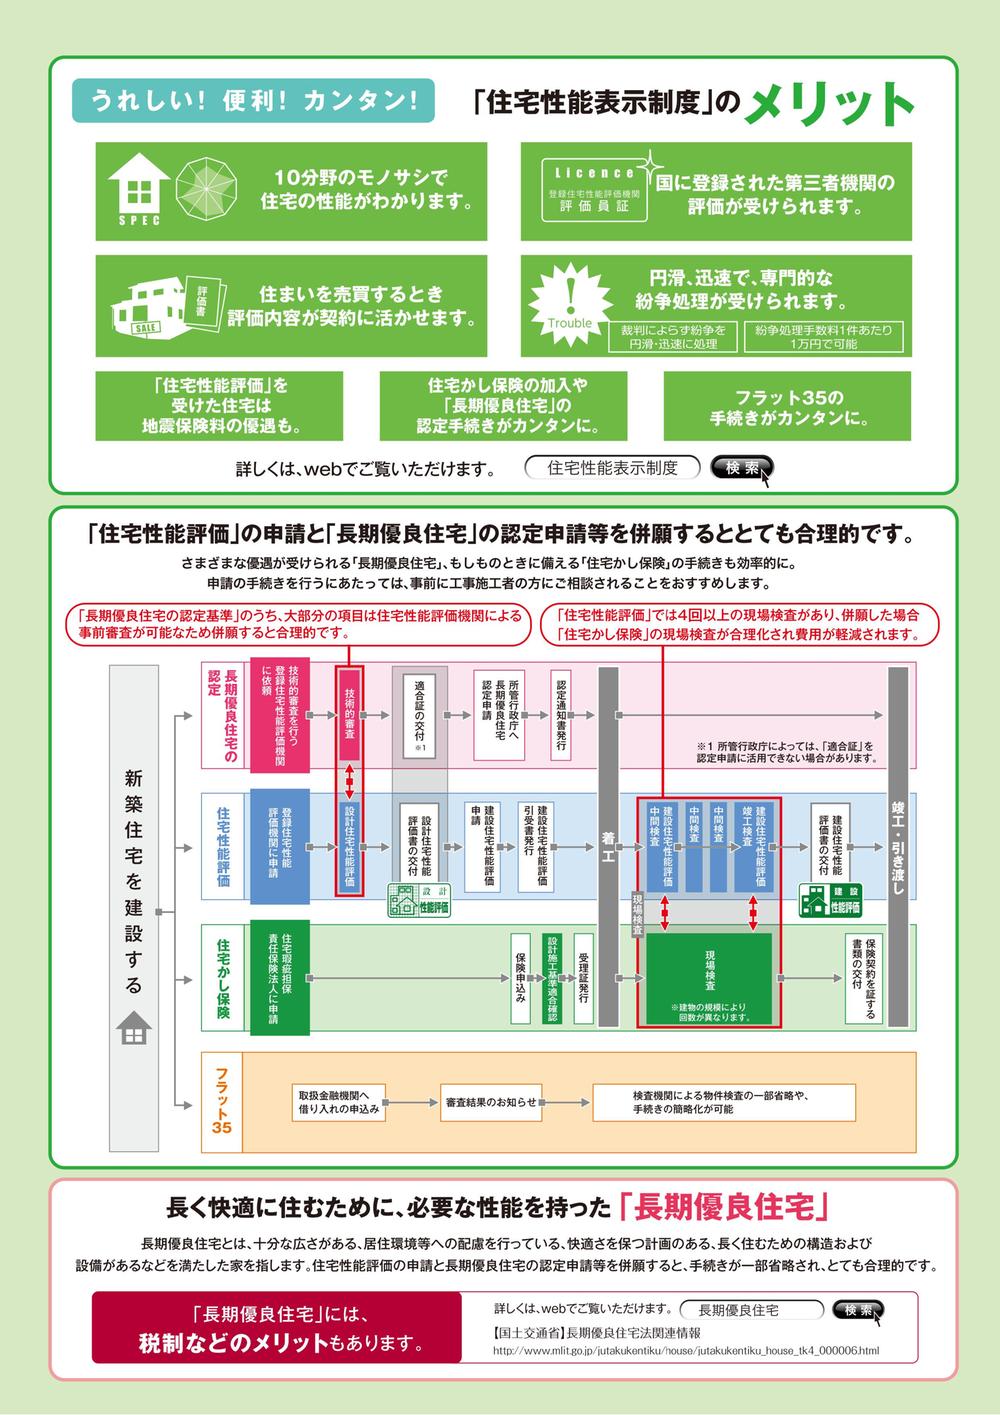 Construction ・ Construction method ・ specification. Design performance evaluation report and construction performance evaluation report of two types! ! 